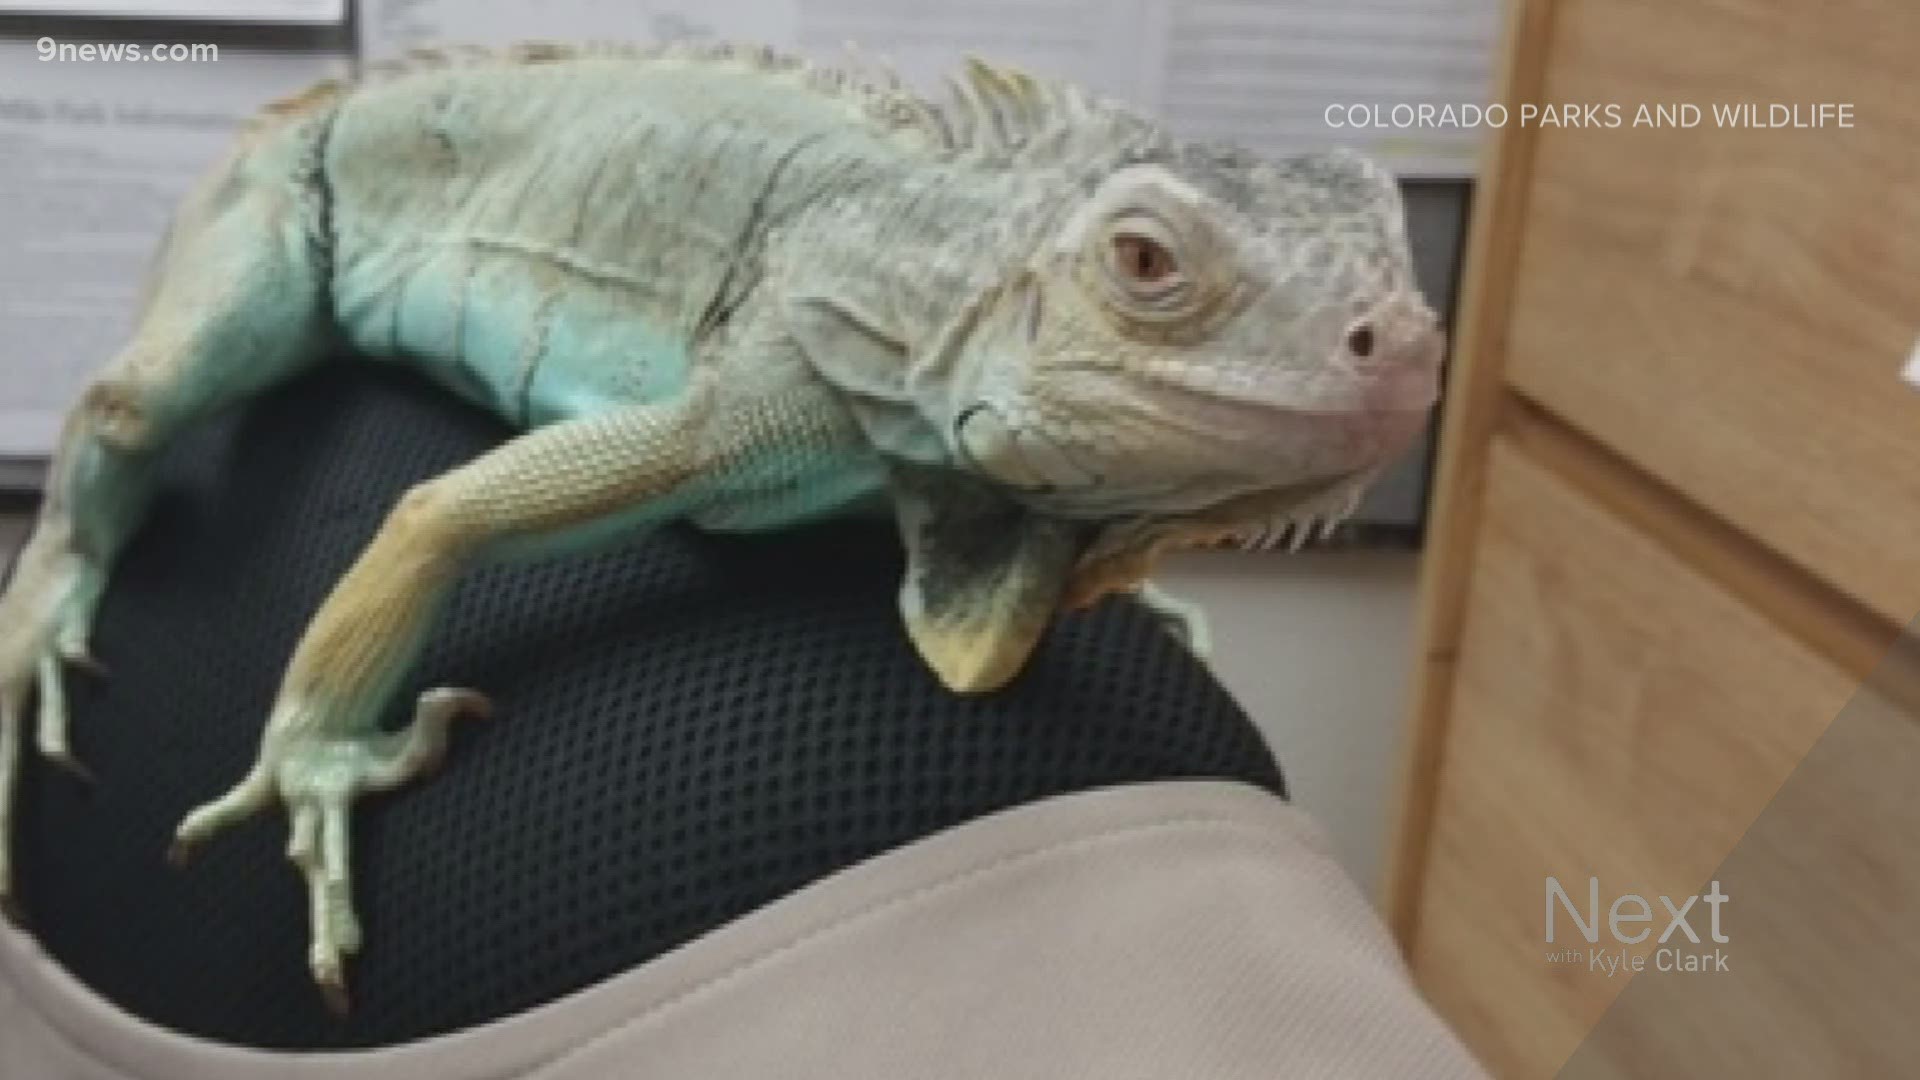 Miles, a teenage iguana, was found alone in Eleven Mile State Park. Spoiler alert: Iguanas cannot survive alone in Colorado state parks.